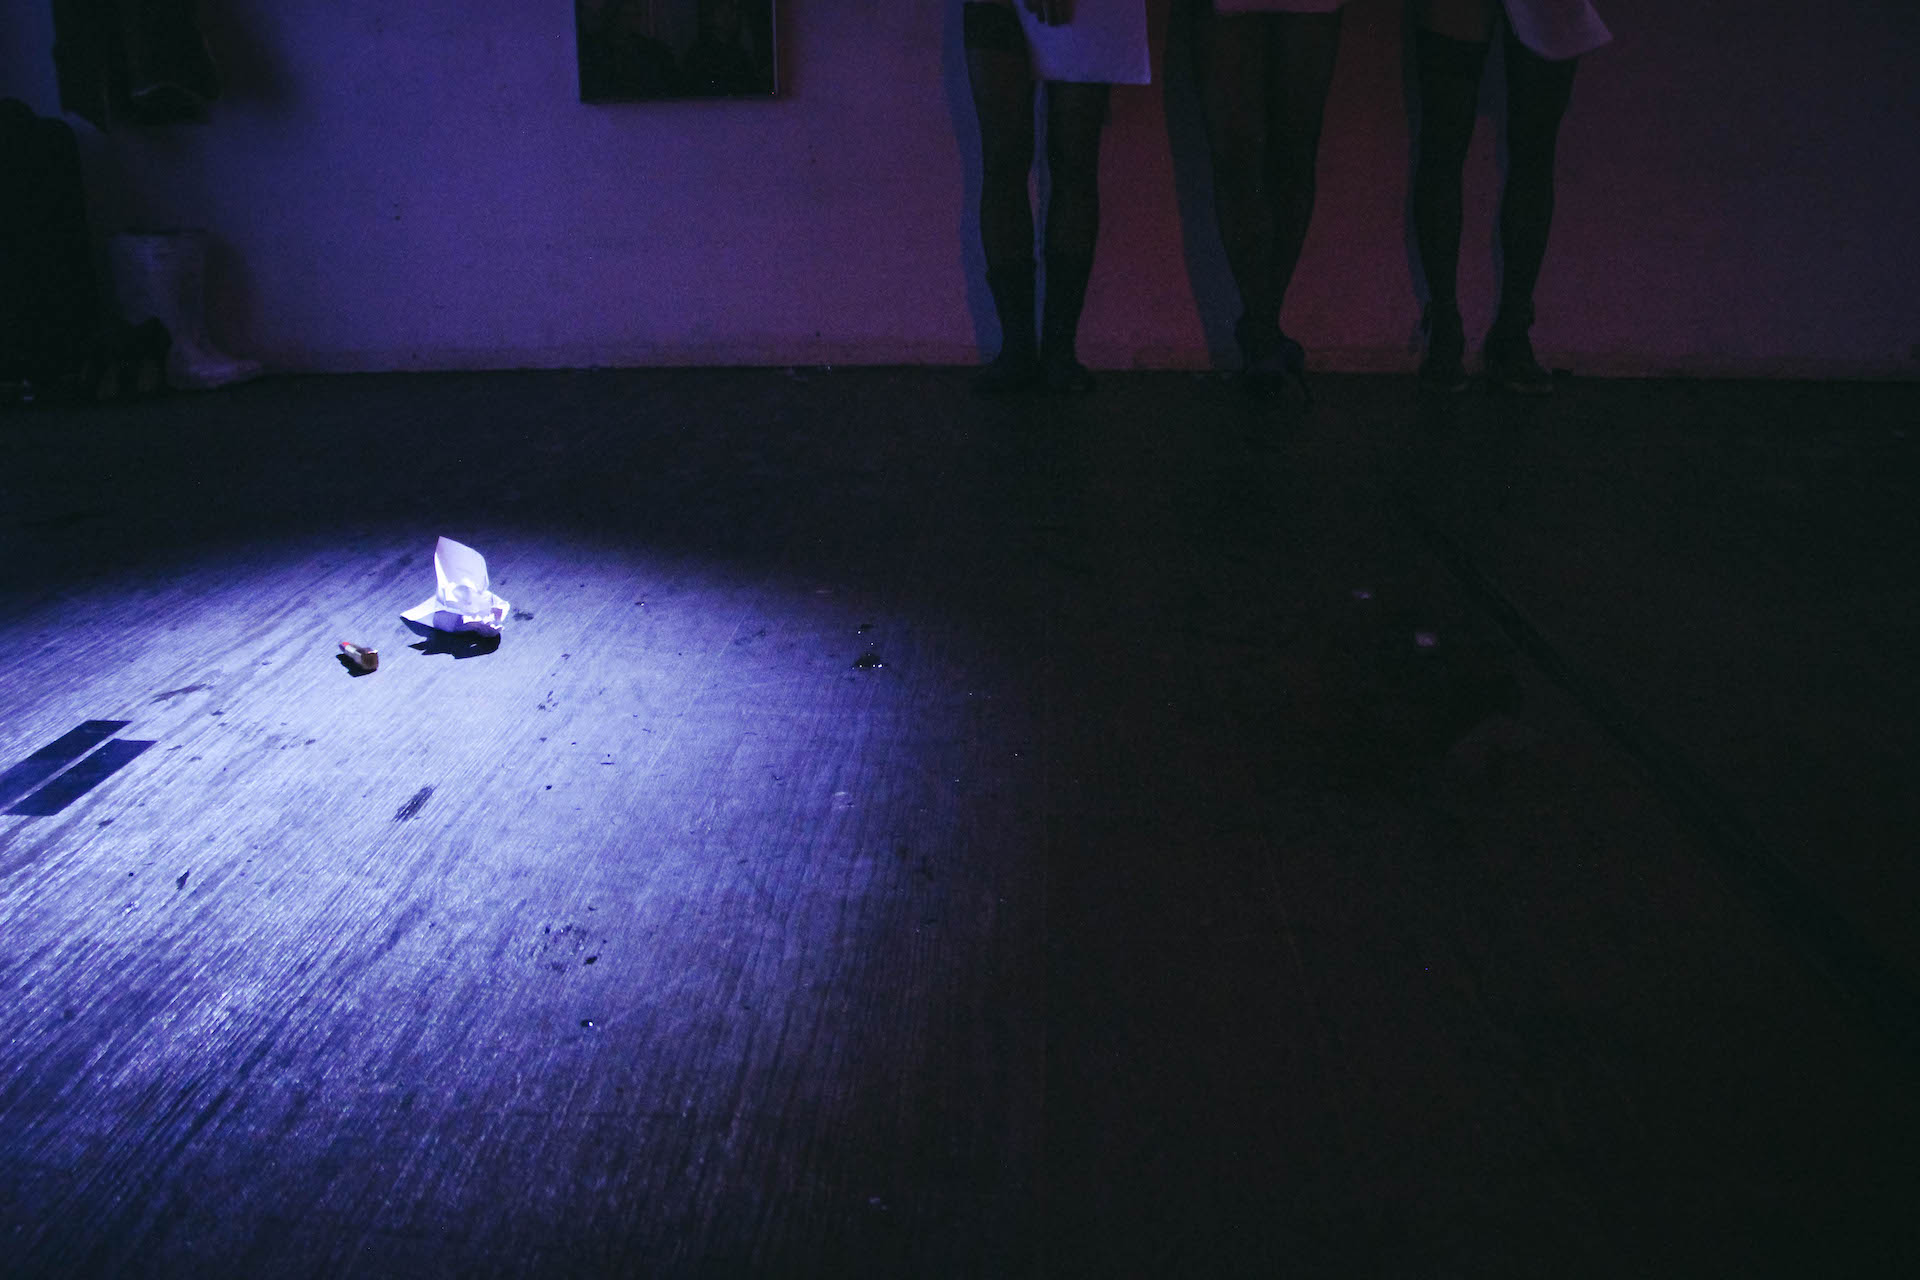 Zoom in to the floor in a dark blue lighted room. On the floor there lies a lipstick and a crumpled piece of paper.